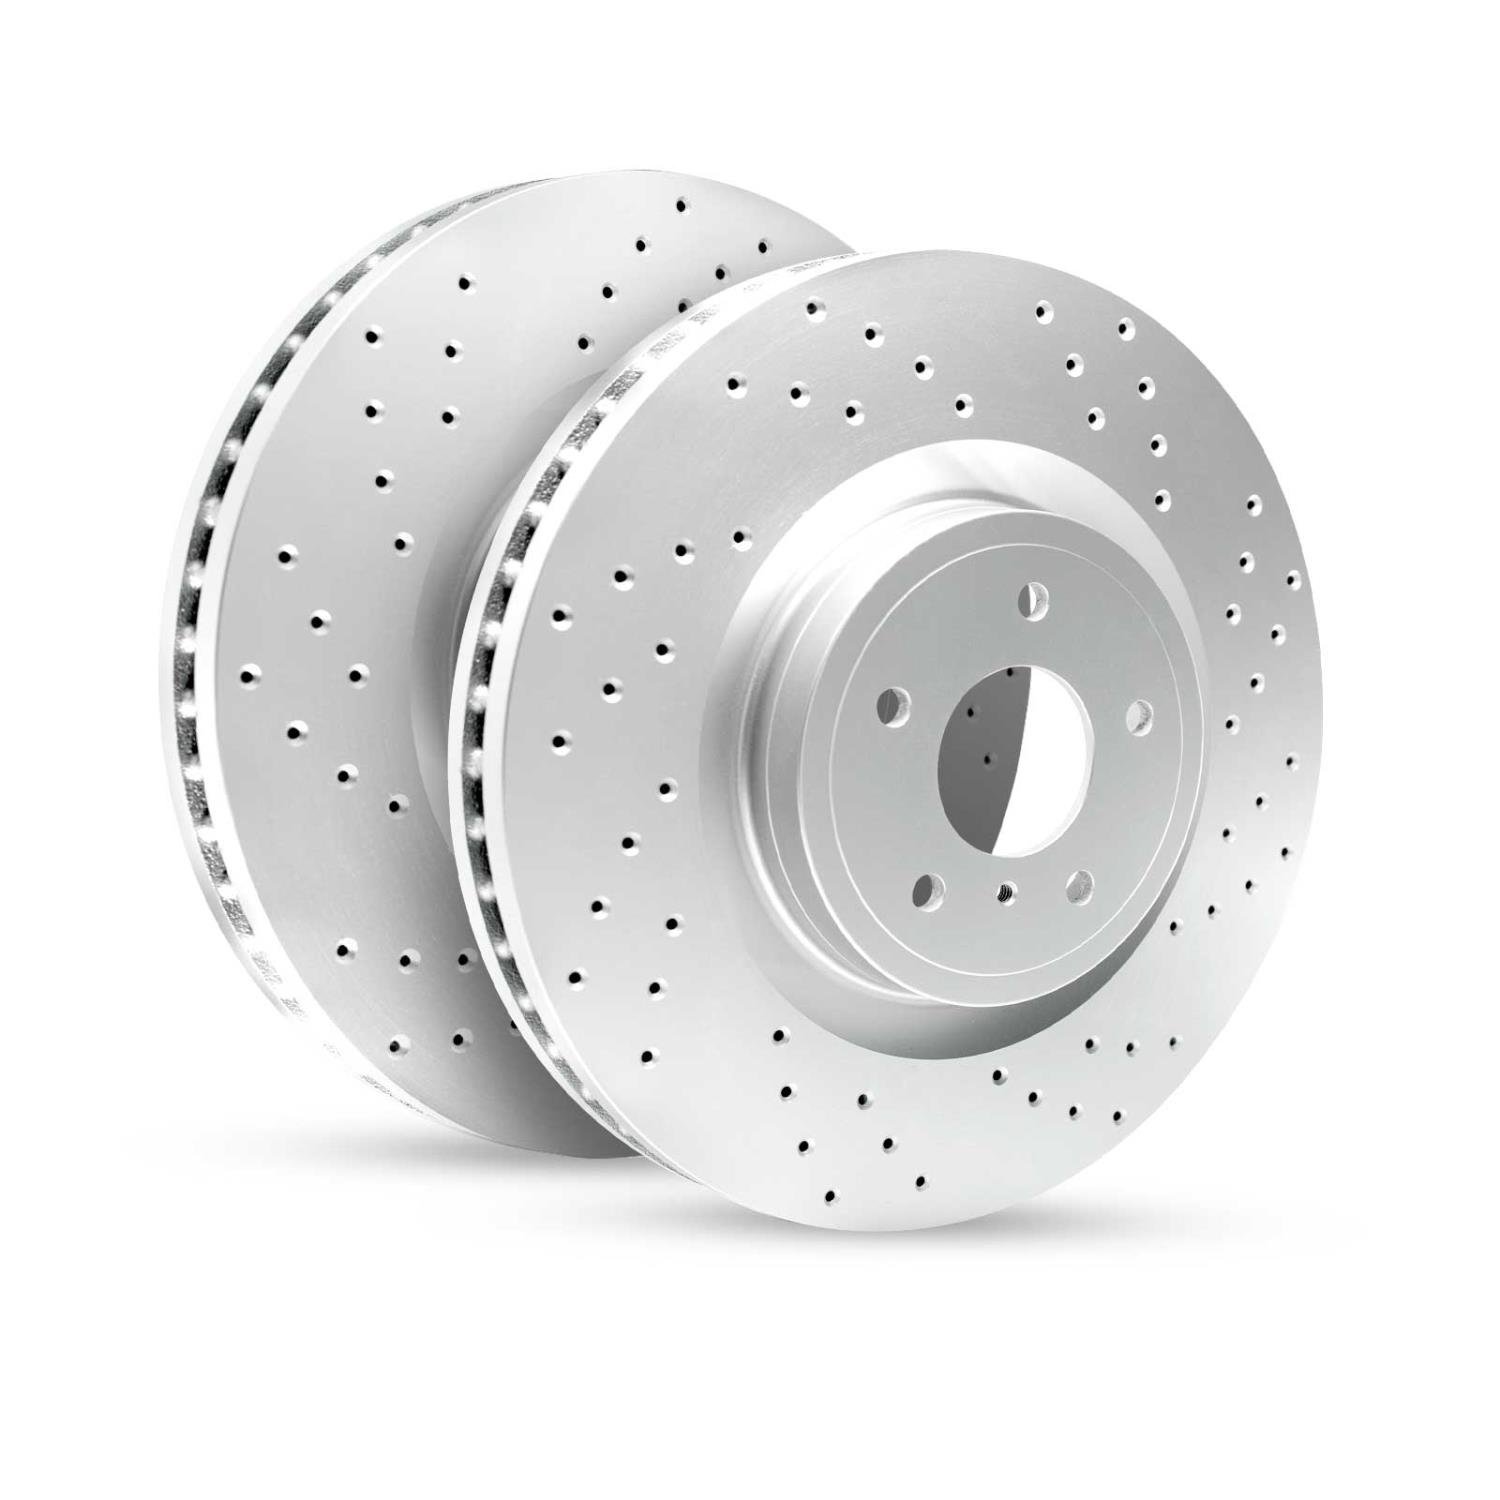 GEO-Carbon Drilled/Slotted Rotors, 1989-2013 Fits Multiple